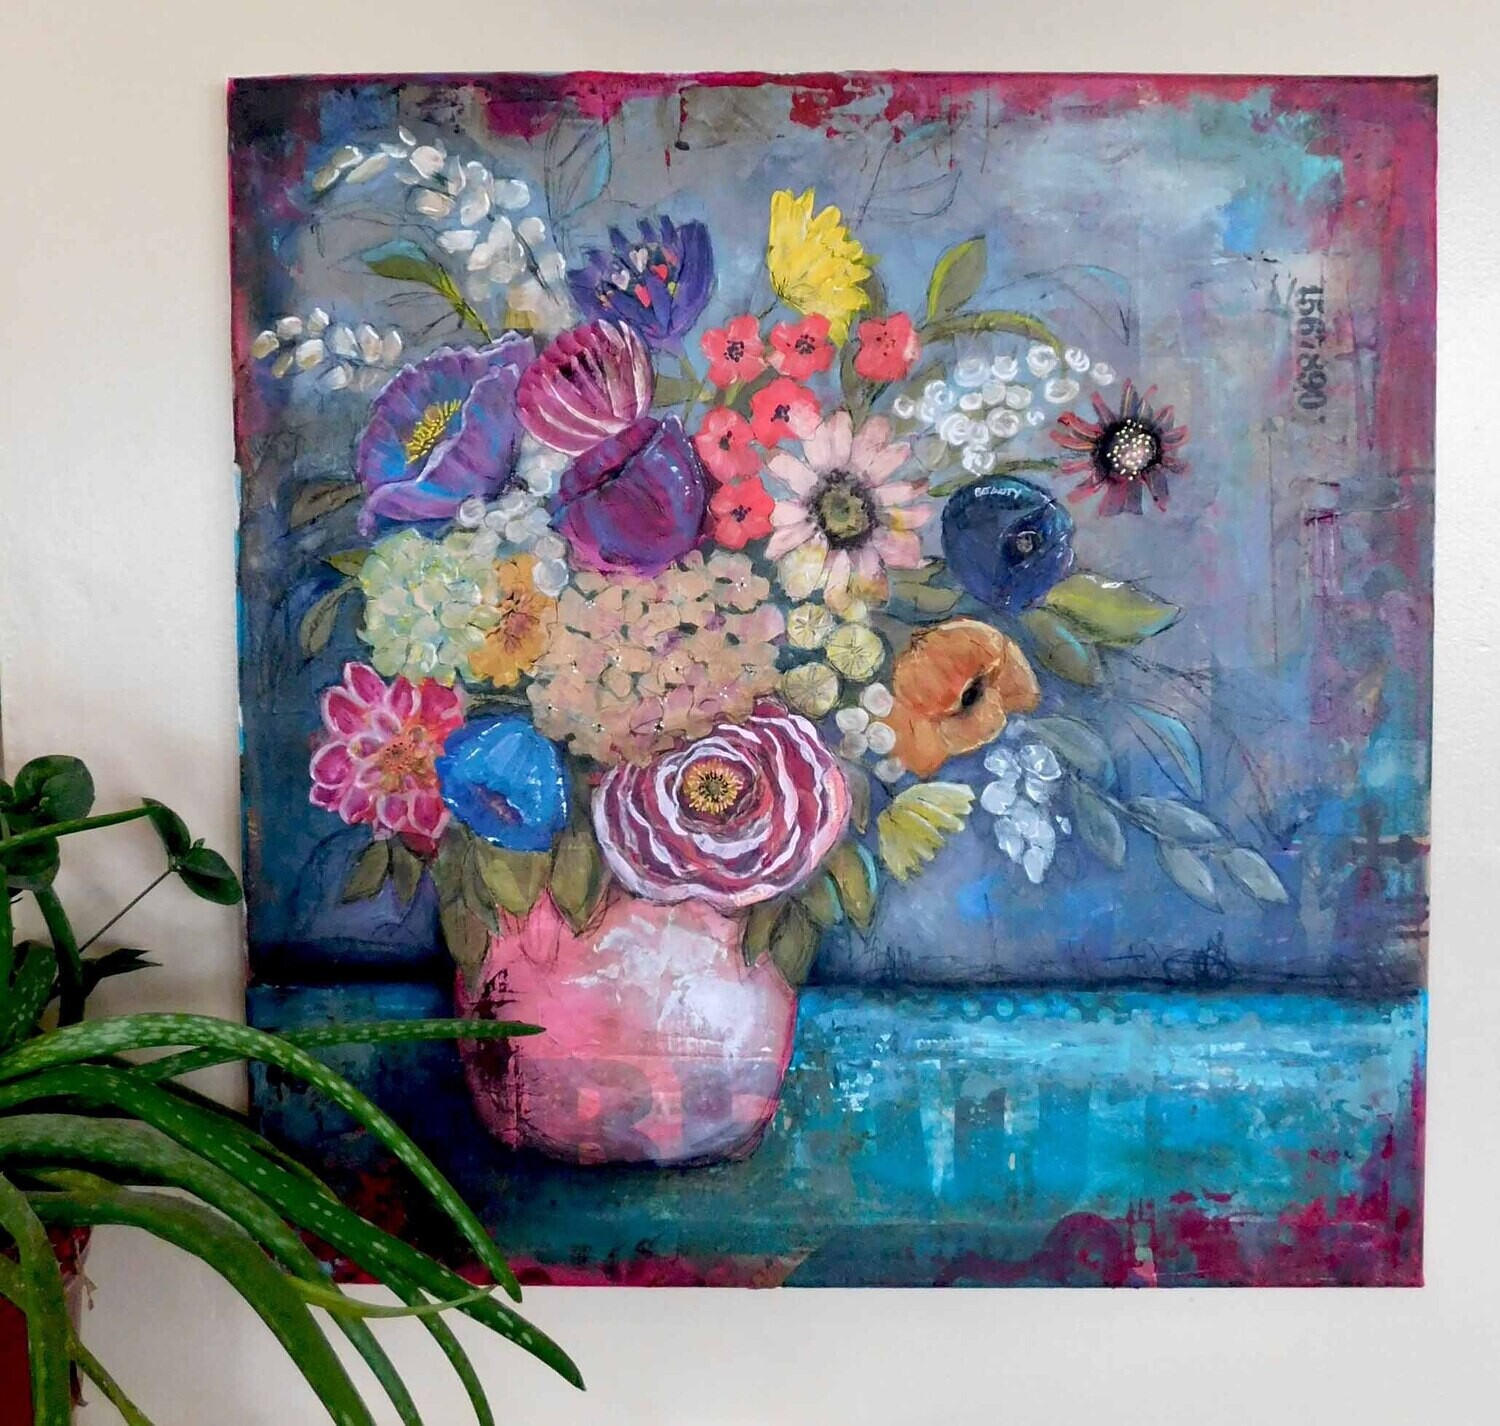 "Blooming Beauty" mixed media abstract floral 24x24 on canvas